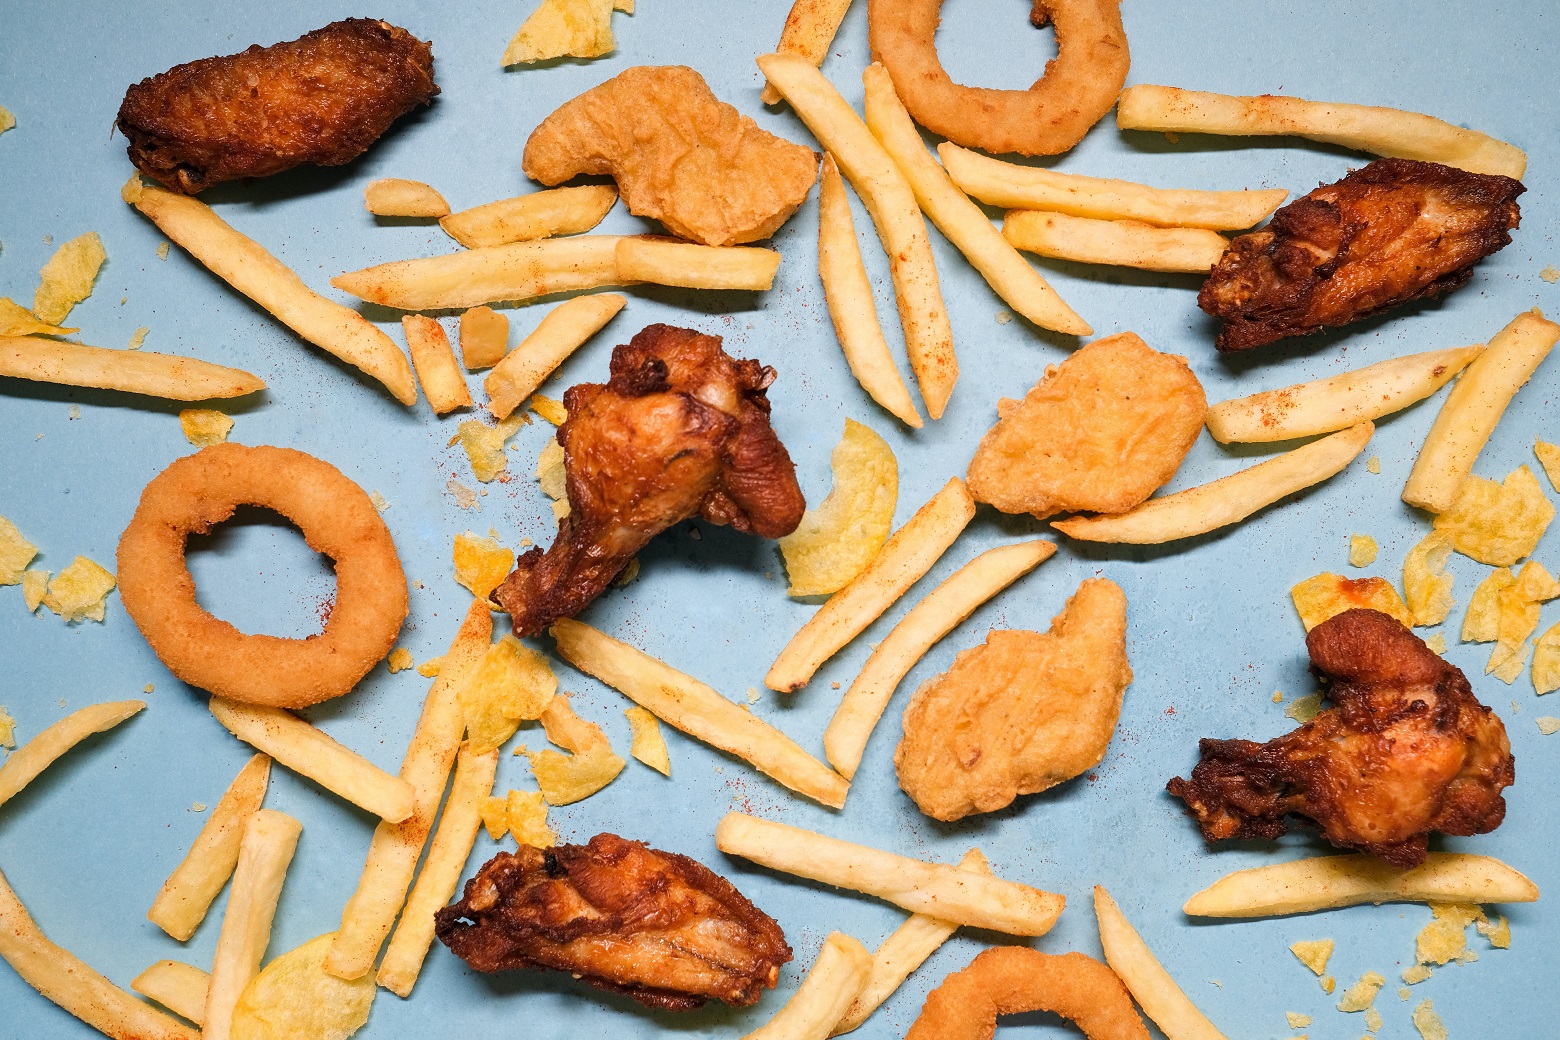 Lessons from Surviving the Pandemic: Just Give Your Kids the Chicken Nuggets (Sometimes)